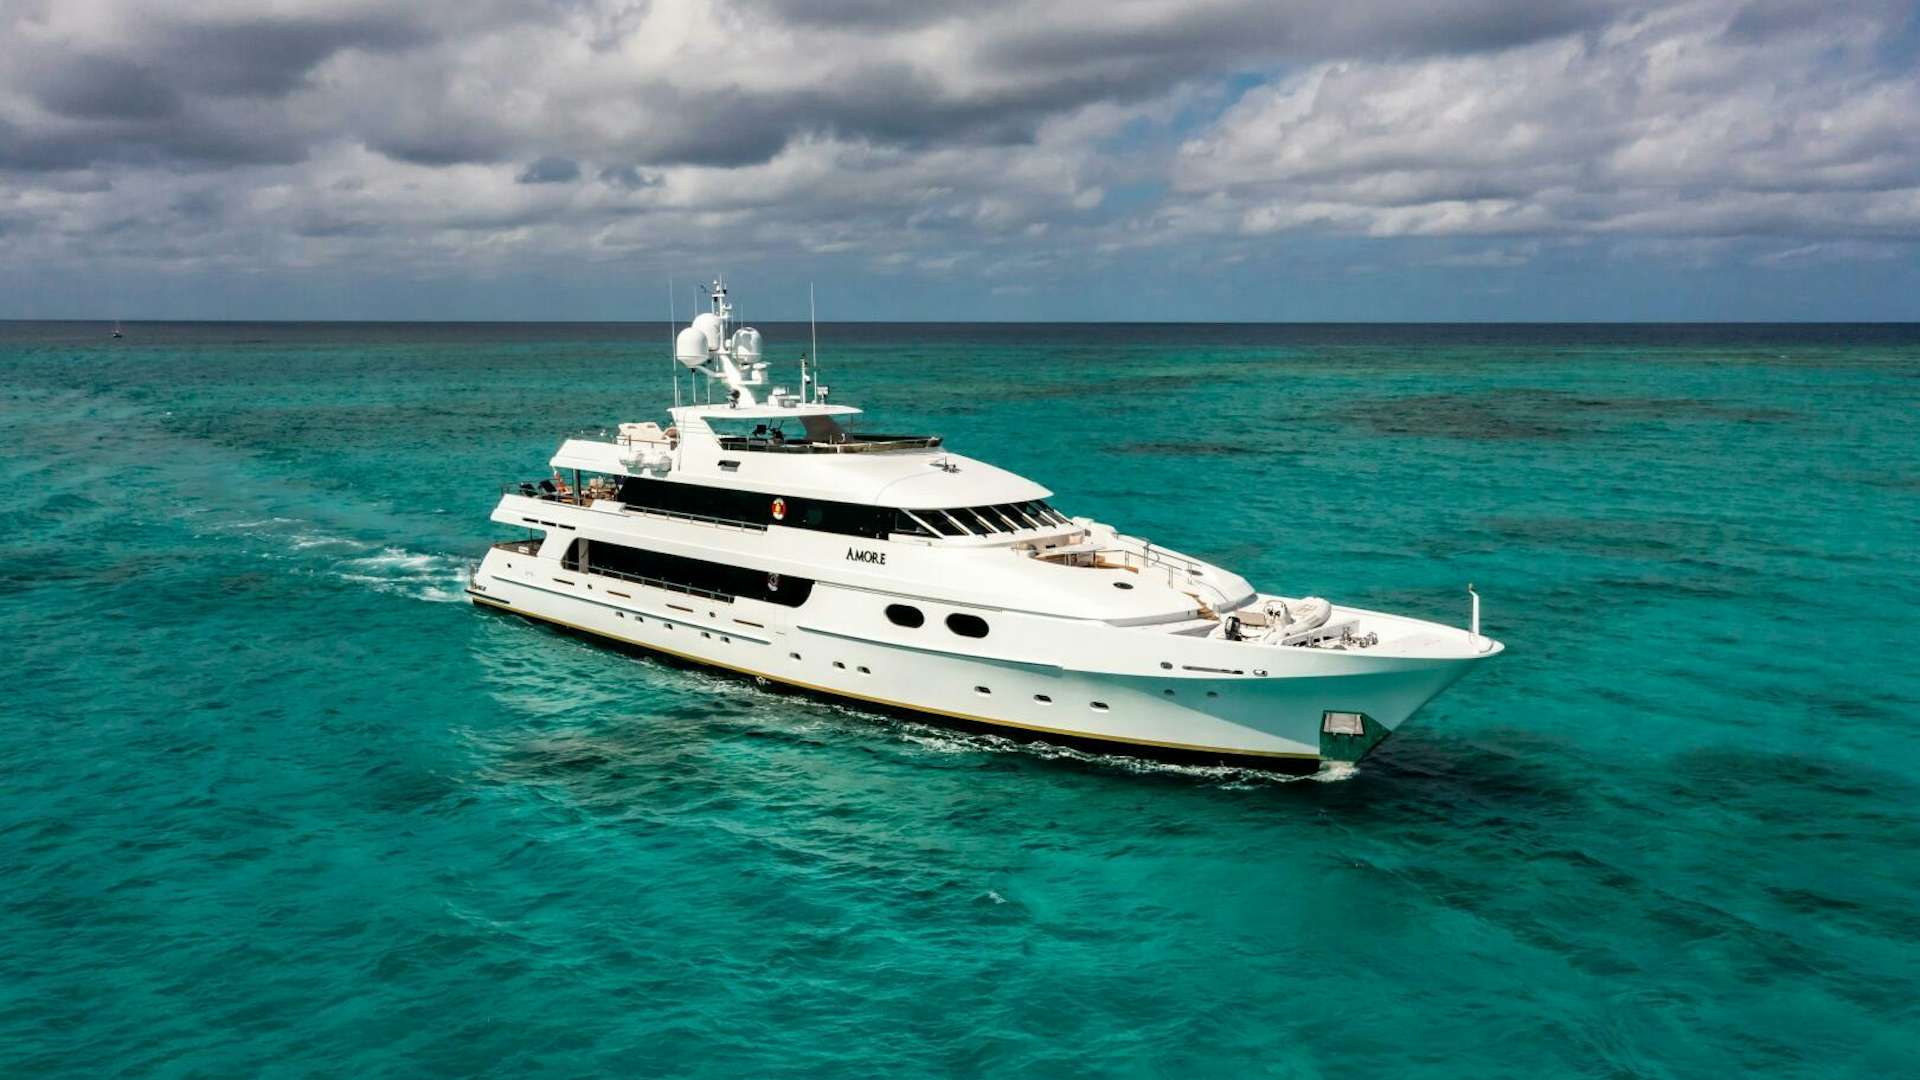 Watch Video for Amore Yacht for Sale